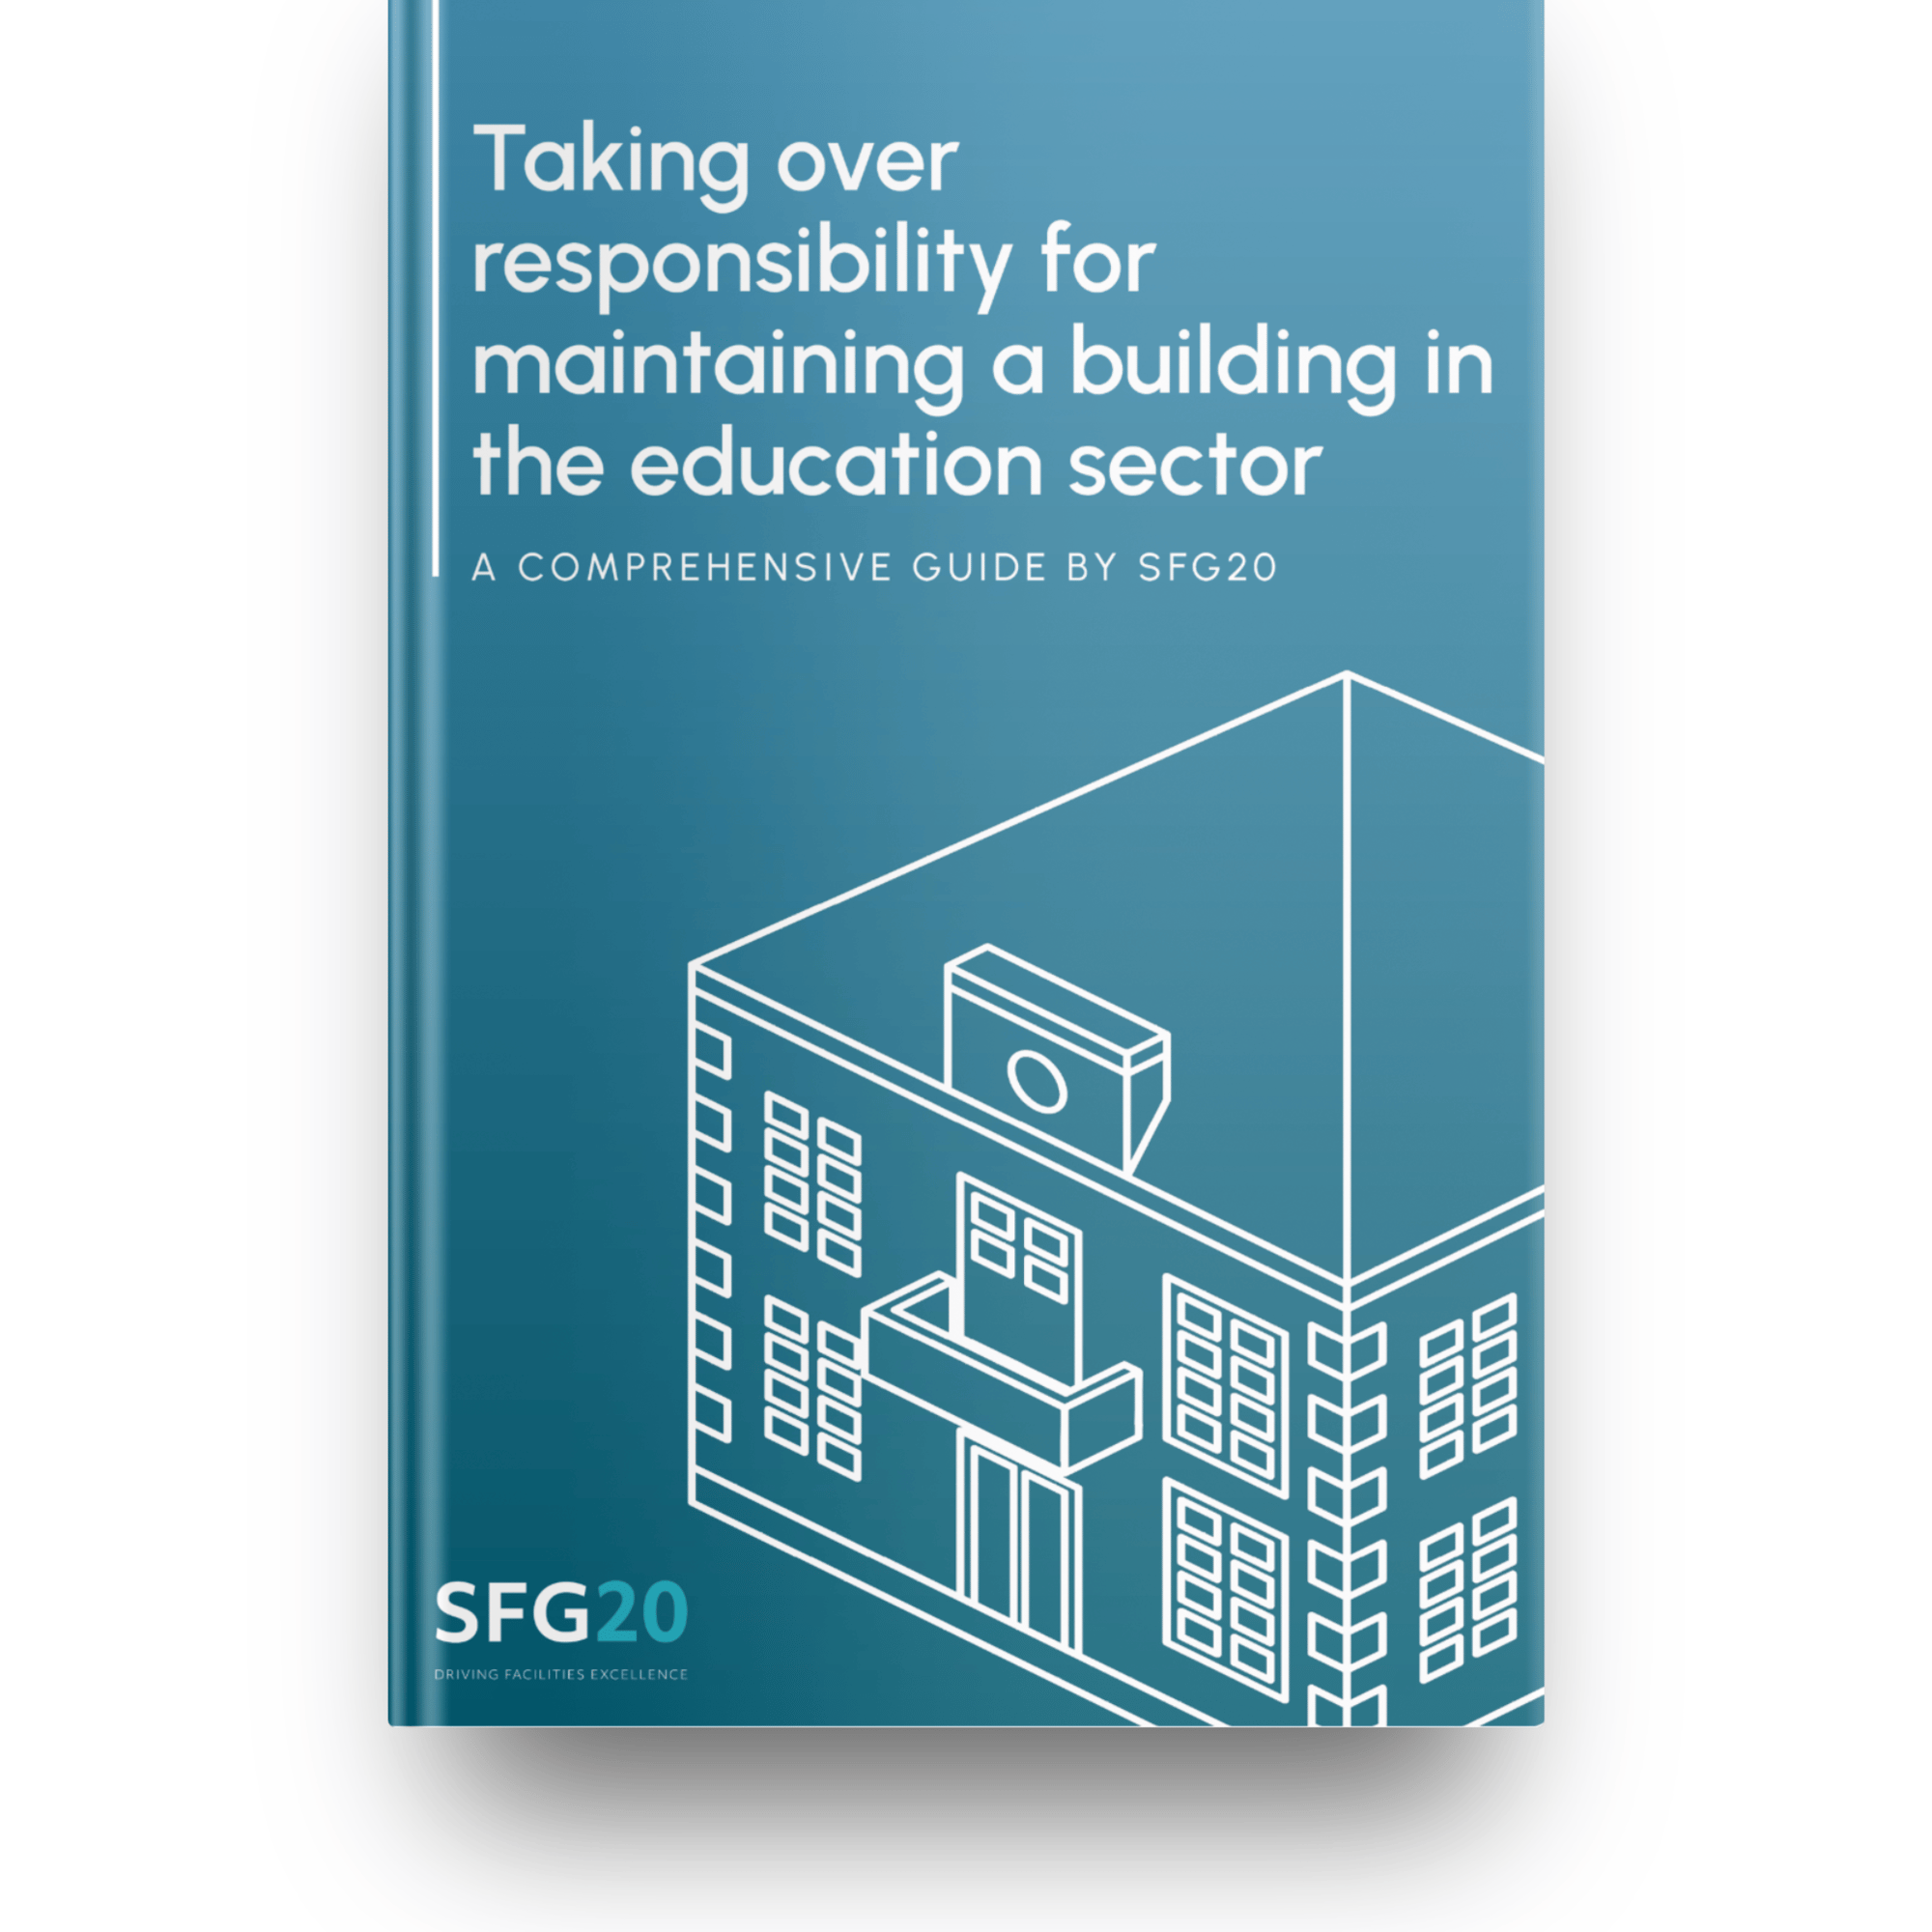 Taking responsibility for maintaining a building in the education sector